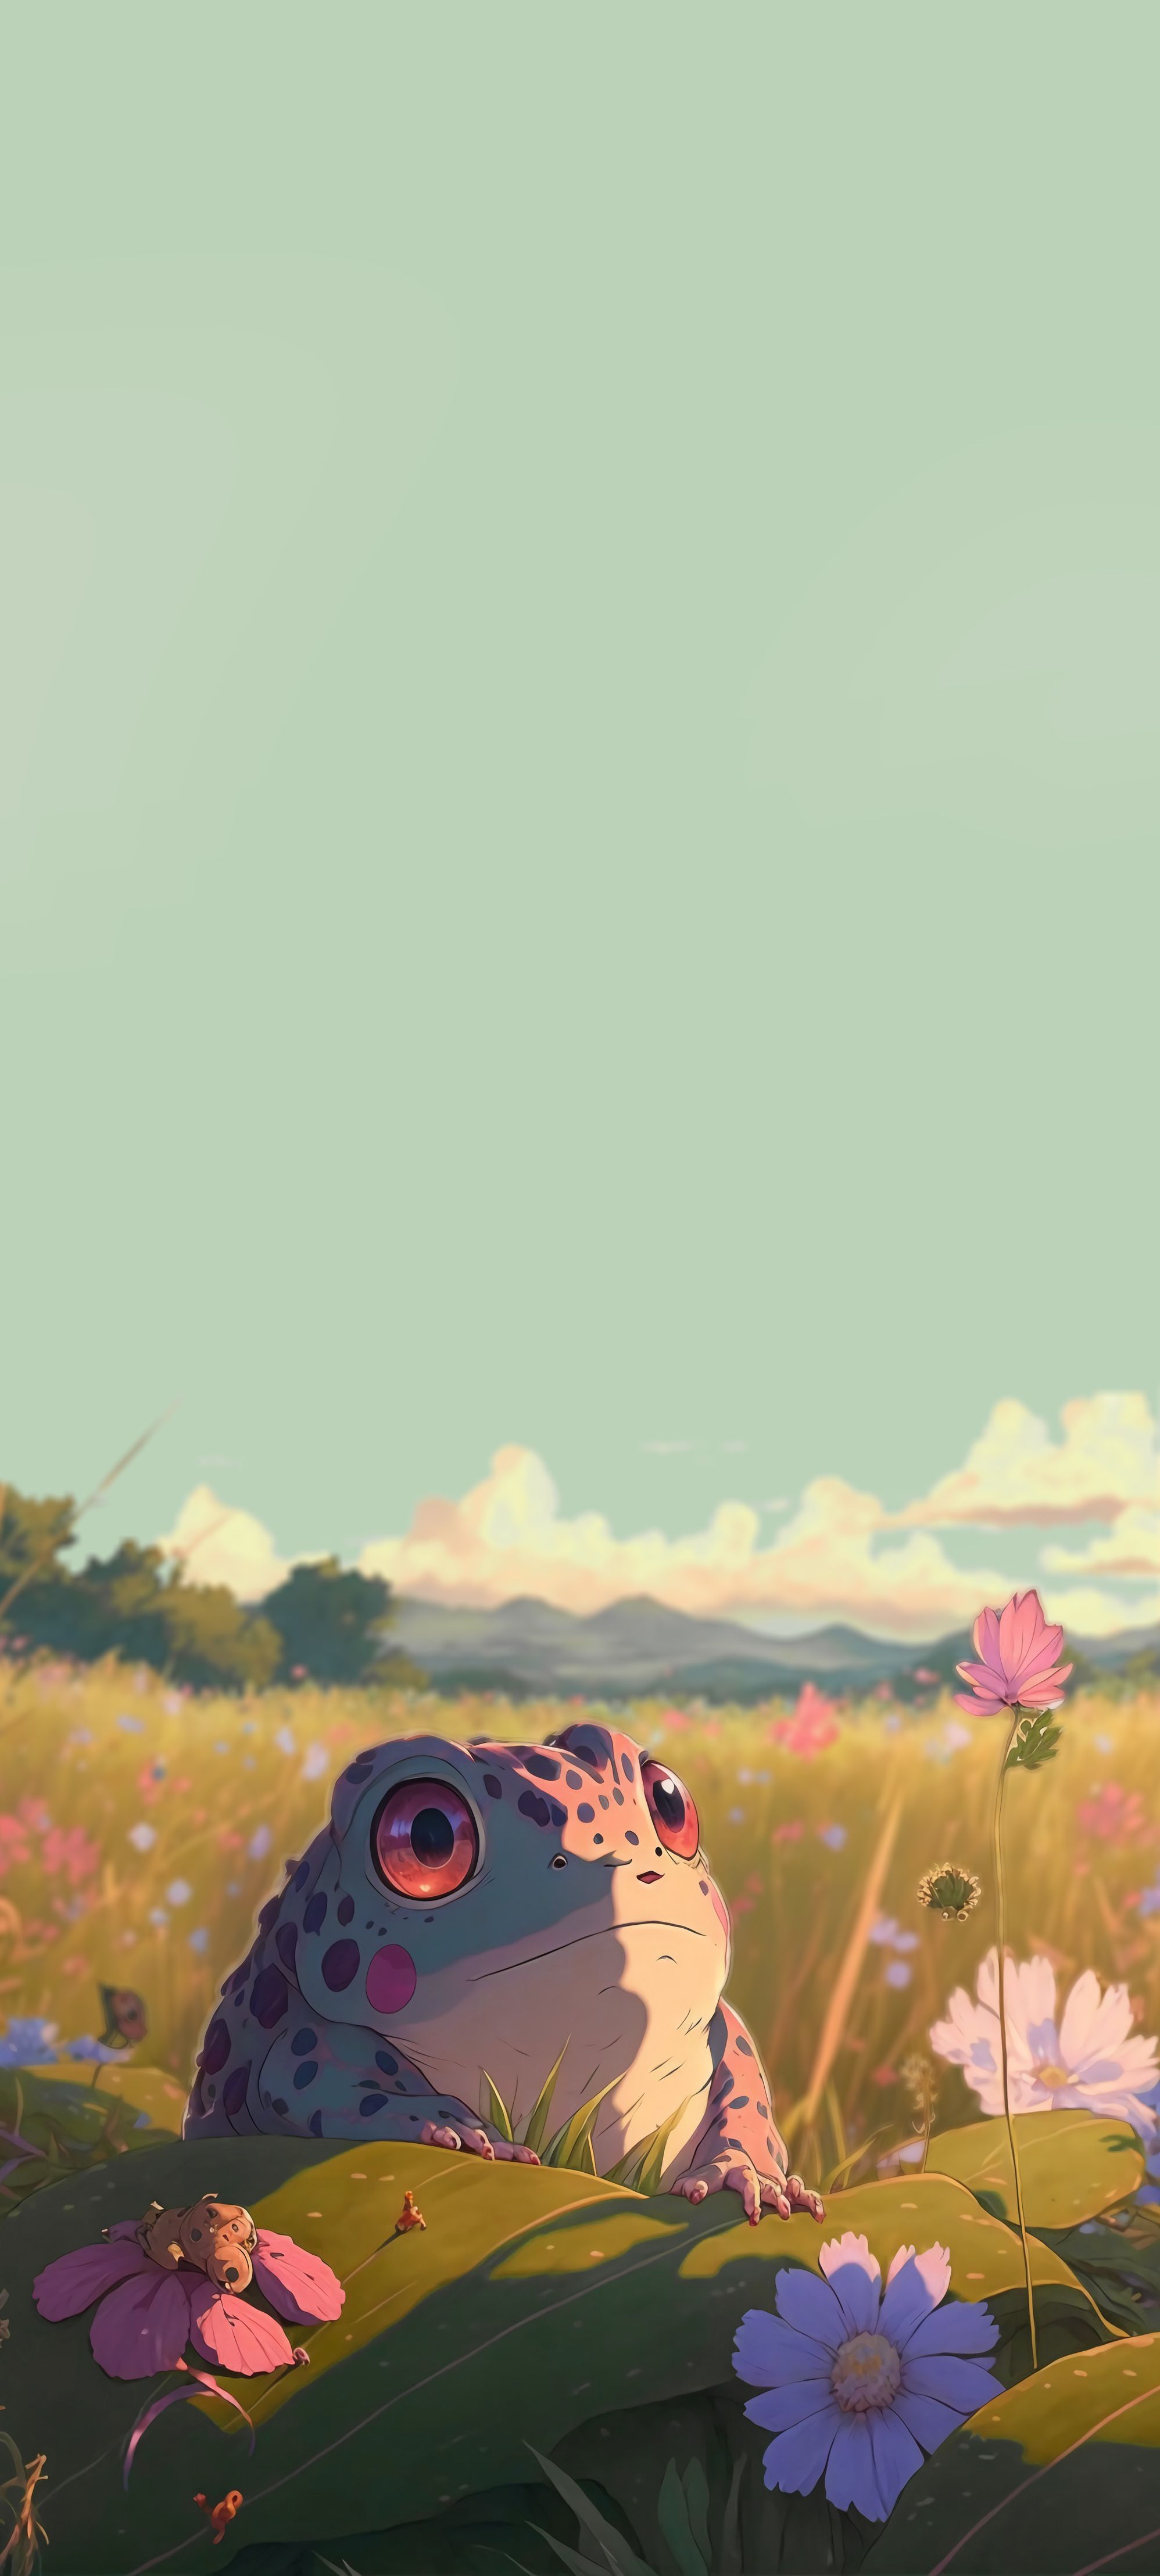 Cute Frog AI Generated Image Wallpaper For Phone